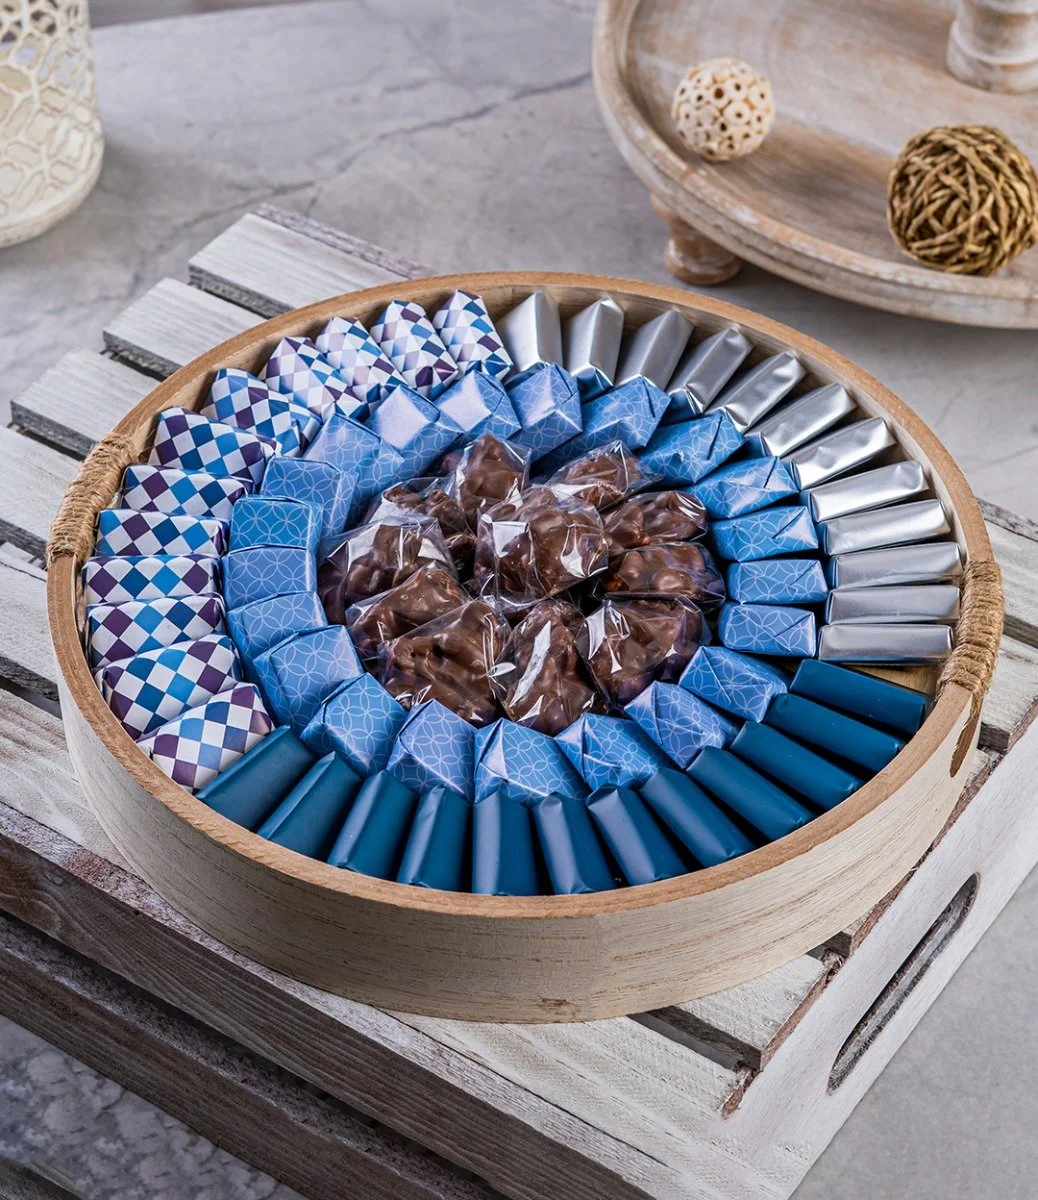 Wrapped Chocolate Arrangement in a Round Wooden Tray - Small